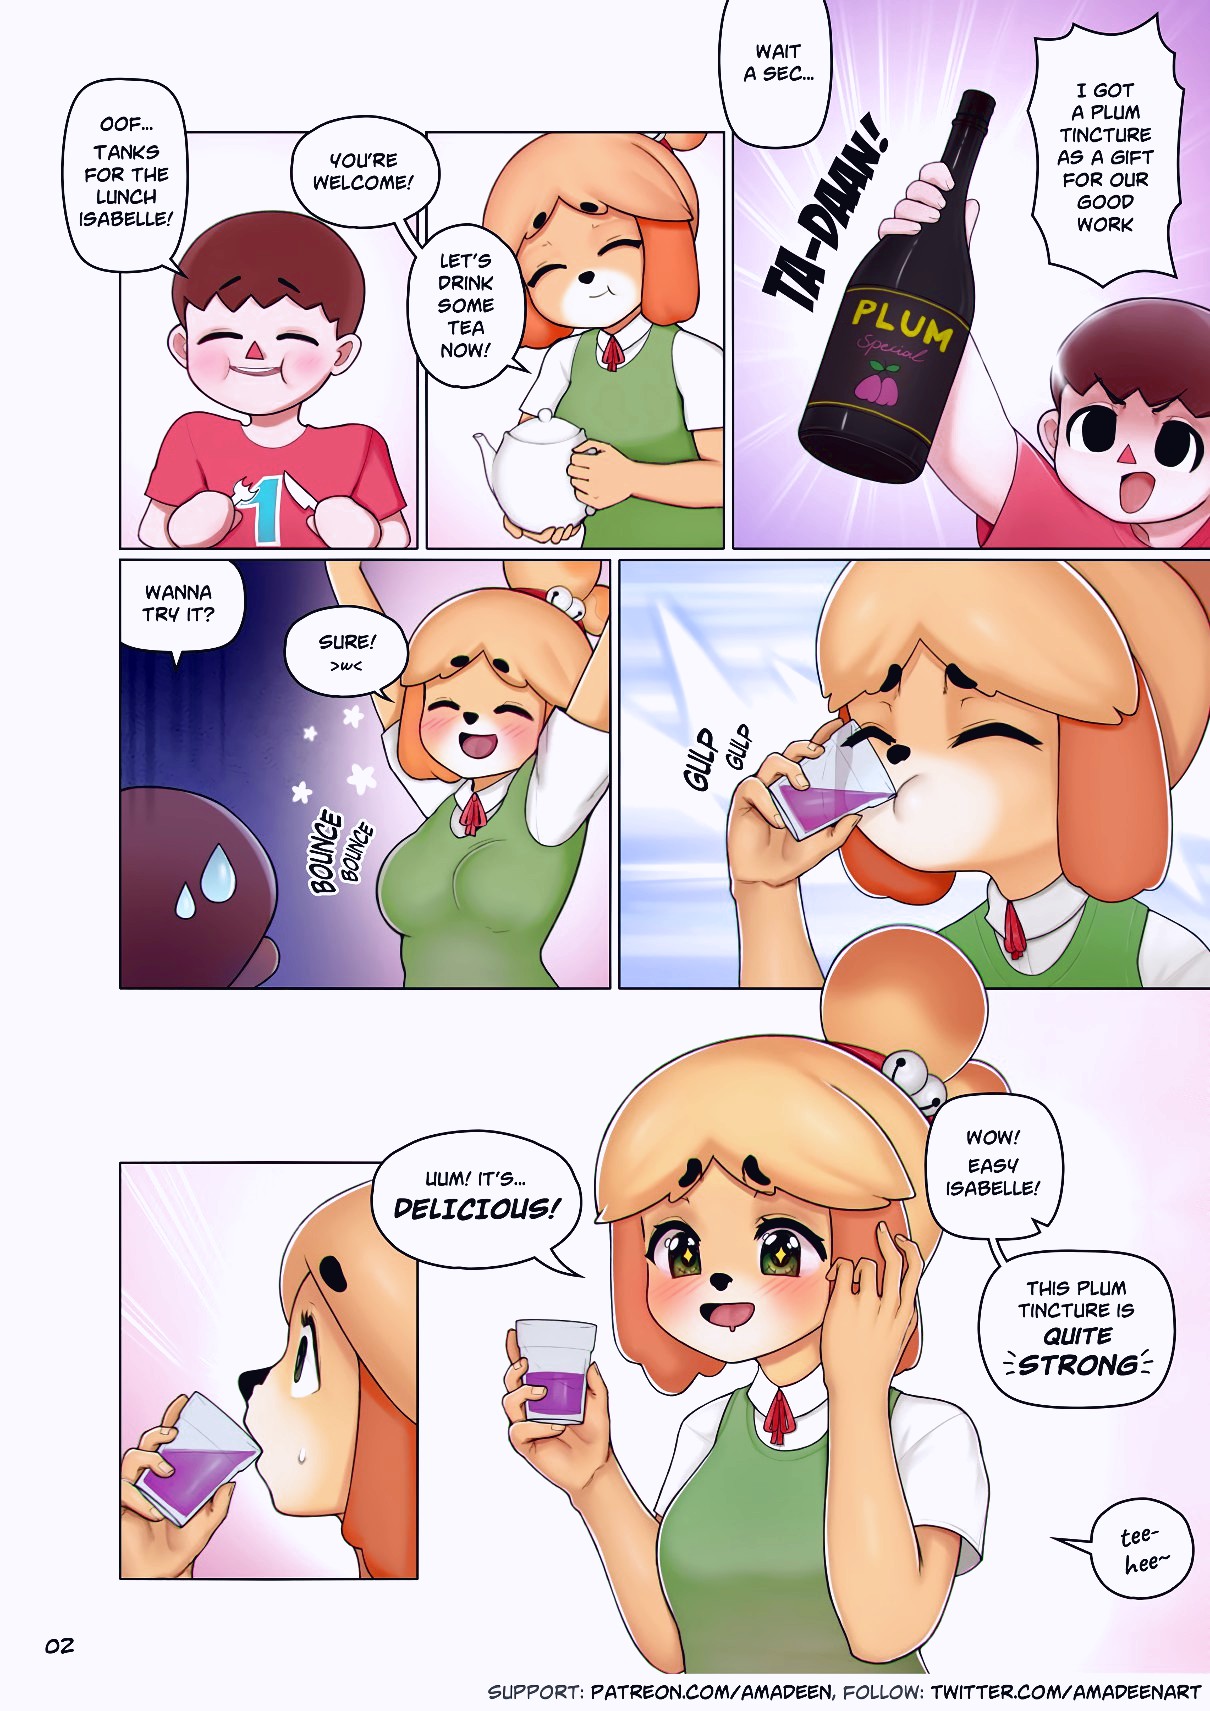 Isabelle's Lunch Incident page 03